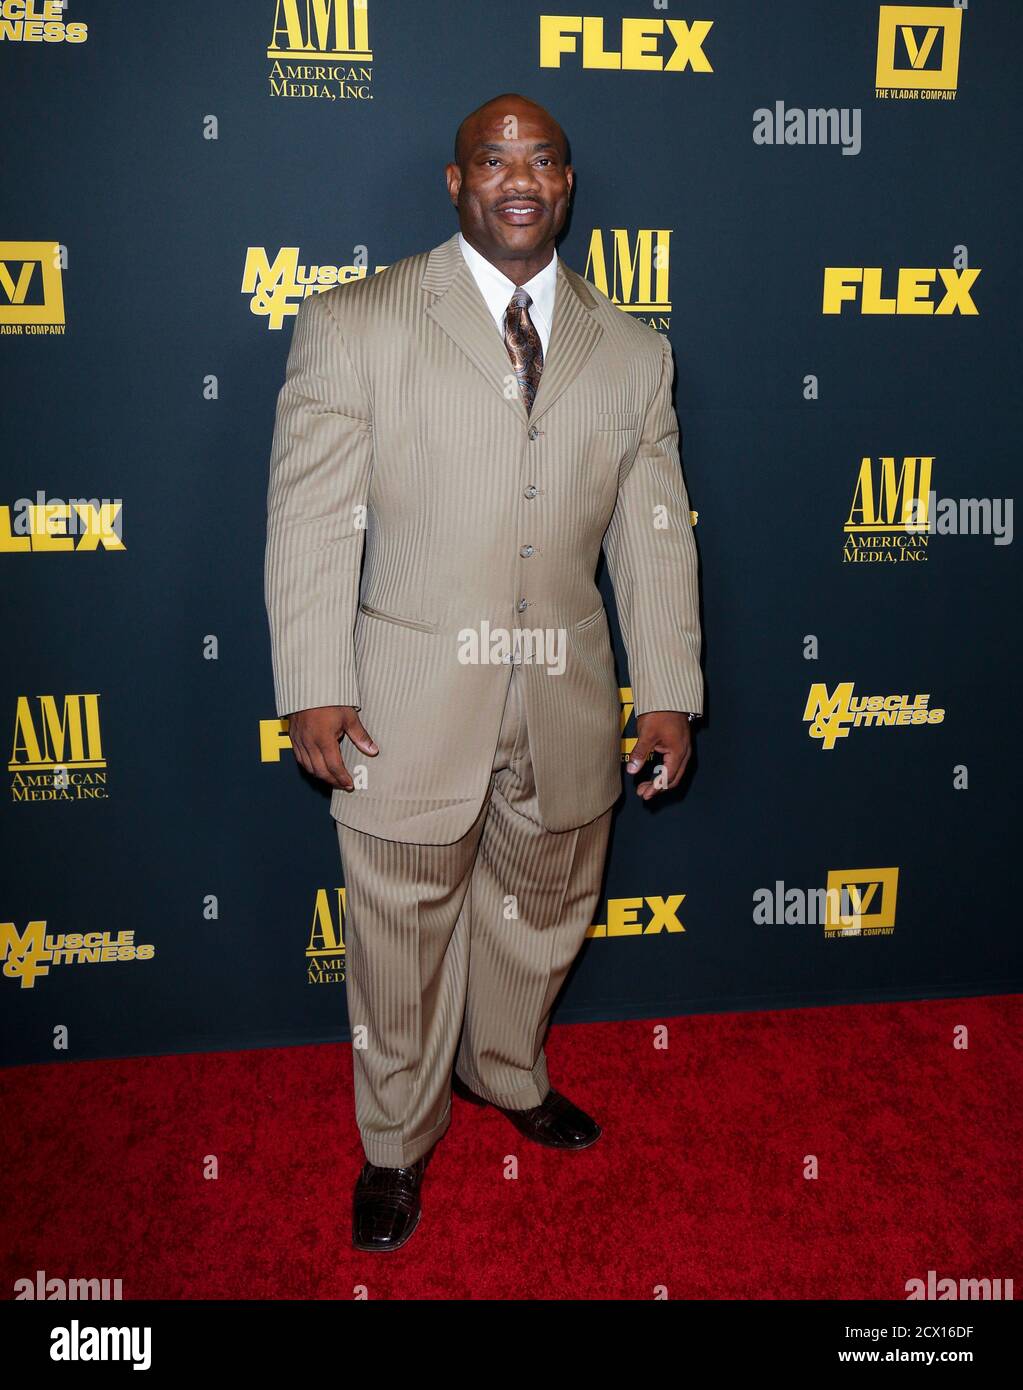 Professional bodybuilder Dexter 'The Blade' Jackson poses at the Los Angeles premiere of the documentary film 'Generation Iron' in Hollywood, California September 18, 2013. The film examines the professional sport of bodybuilding today. REUTERS/Danny Moloshok (UNITED STATES - Tags: ENTERTAINMENT SPORT) Stock Photo